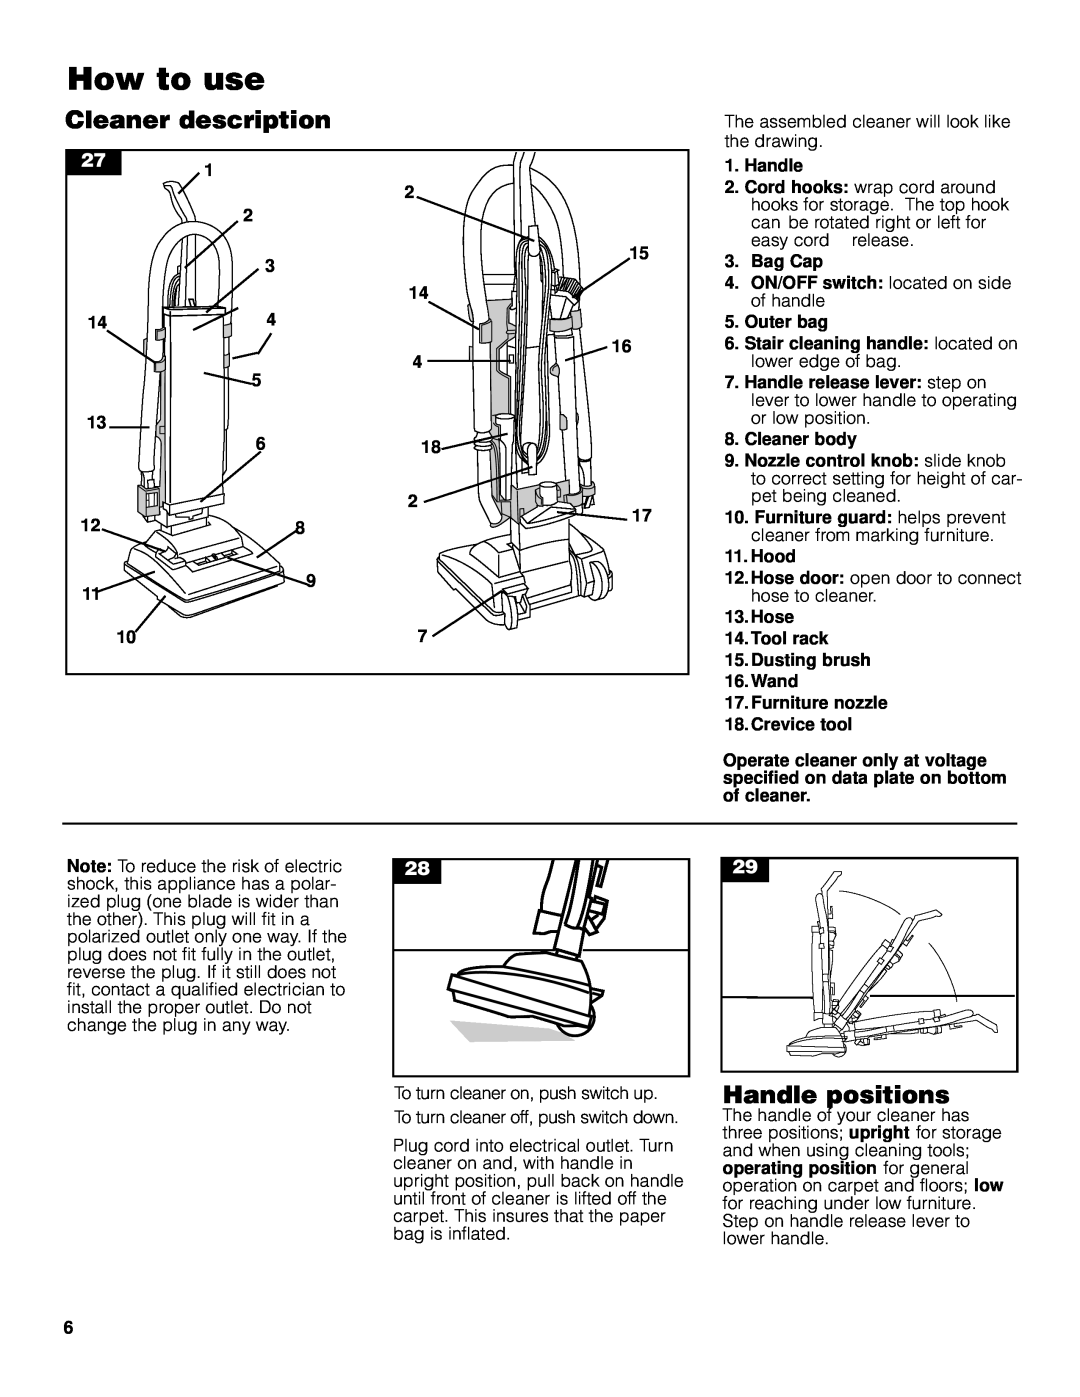 Pacific Digital Upright Vacuum Cleaner warranty How to use, Cleaner description, Handle positions 